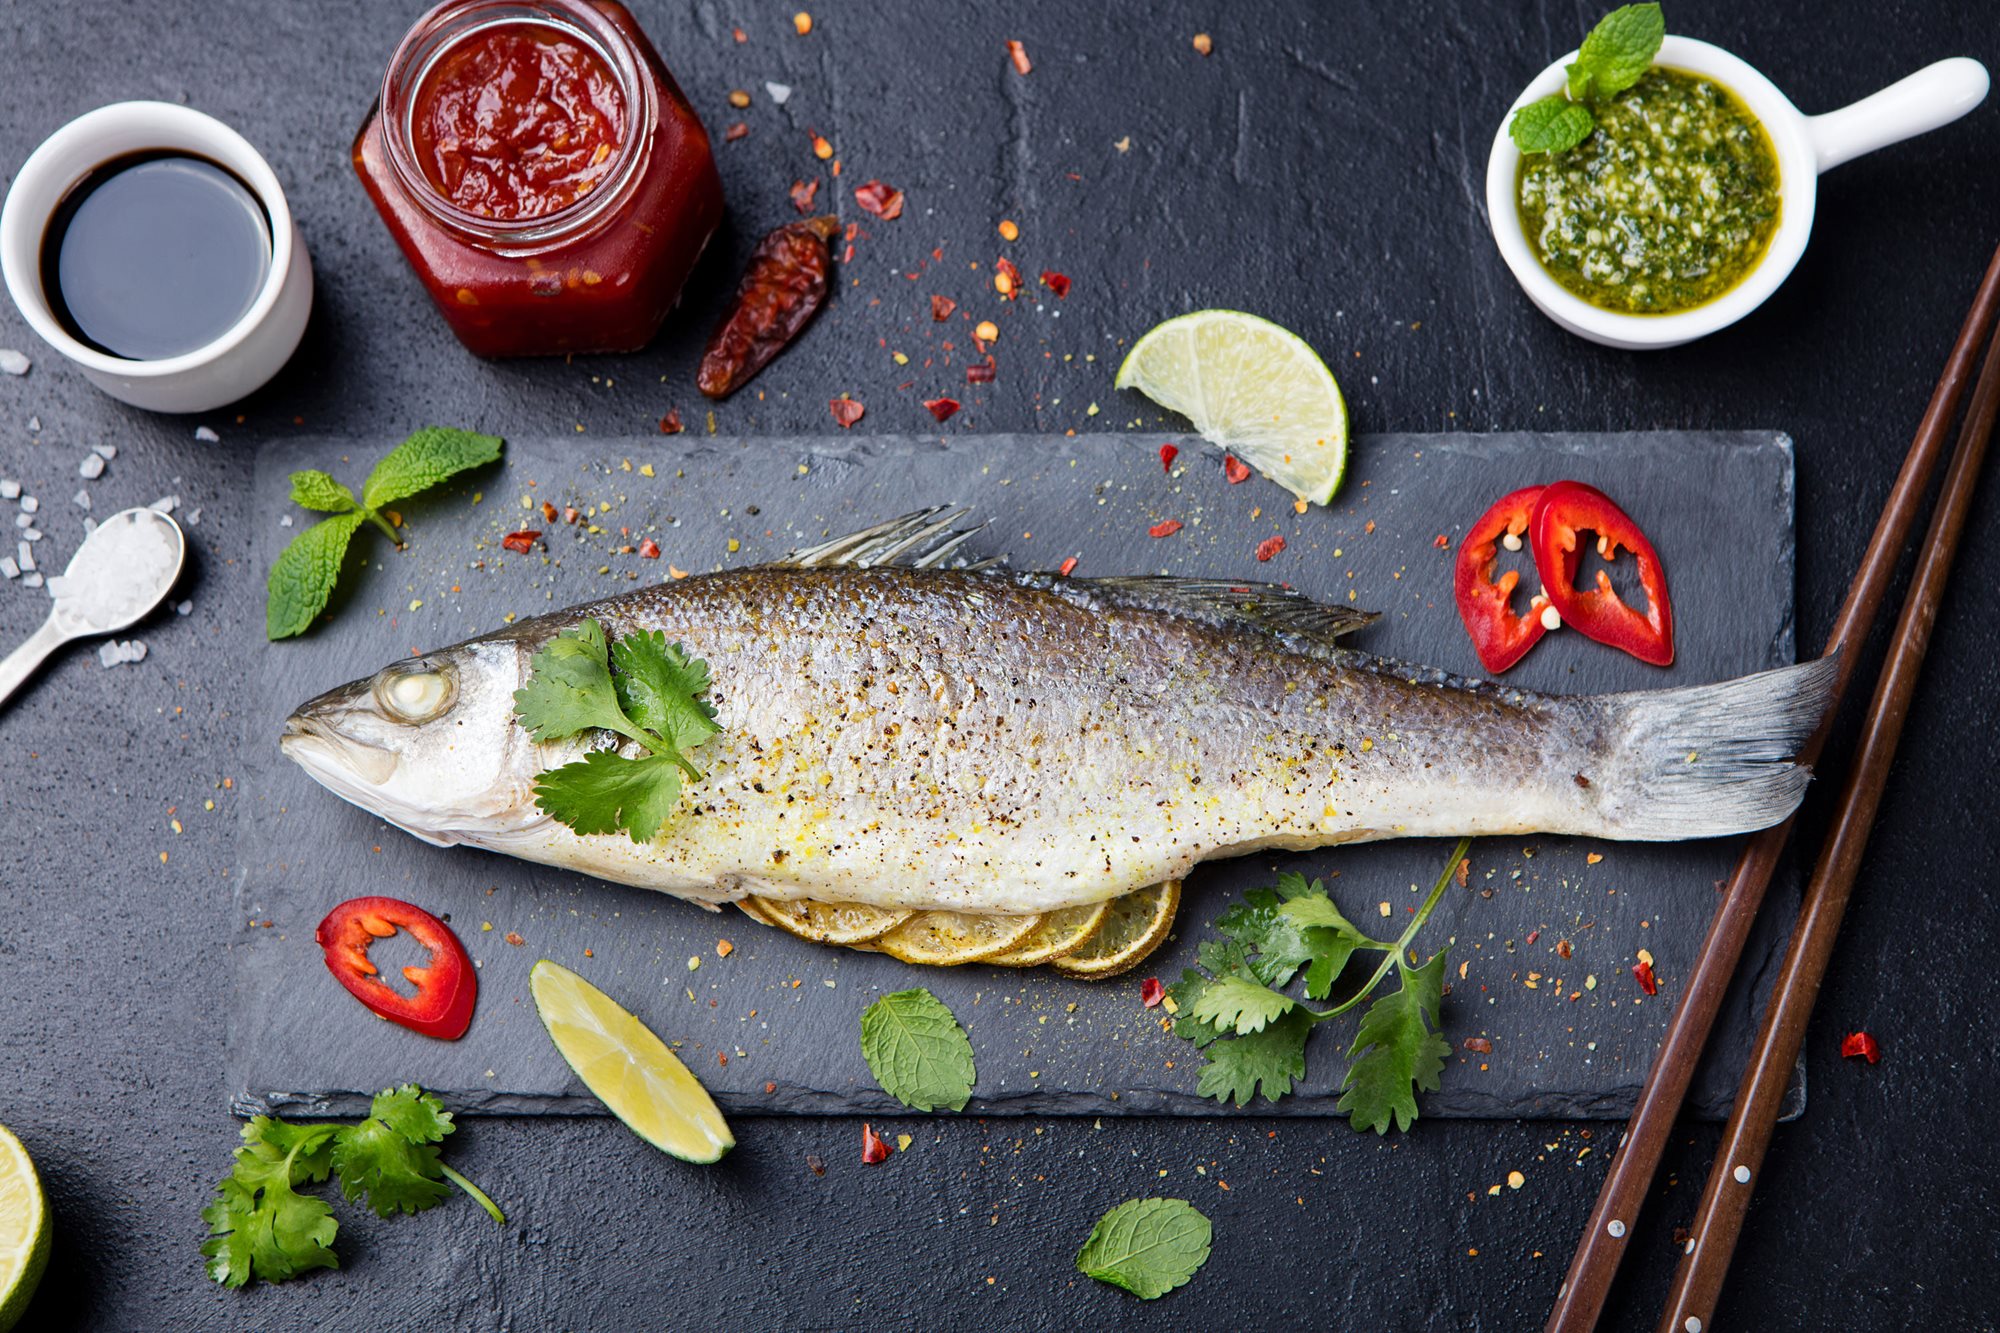 Raw fish and half-cooked meat.Foods to avoid When Pregnant